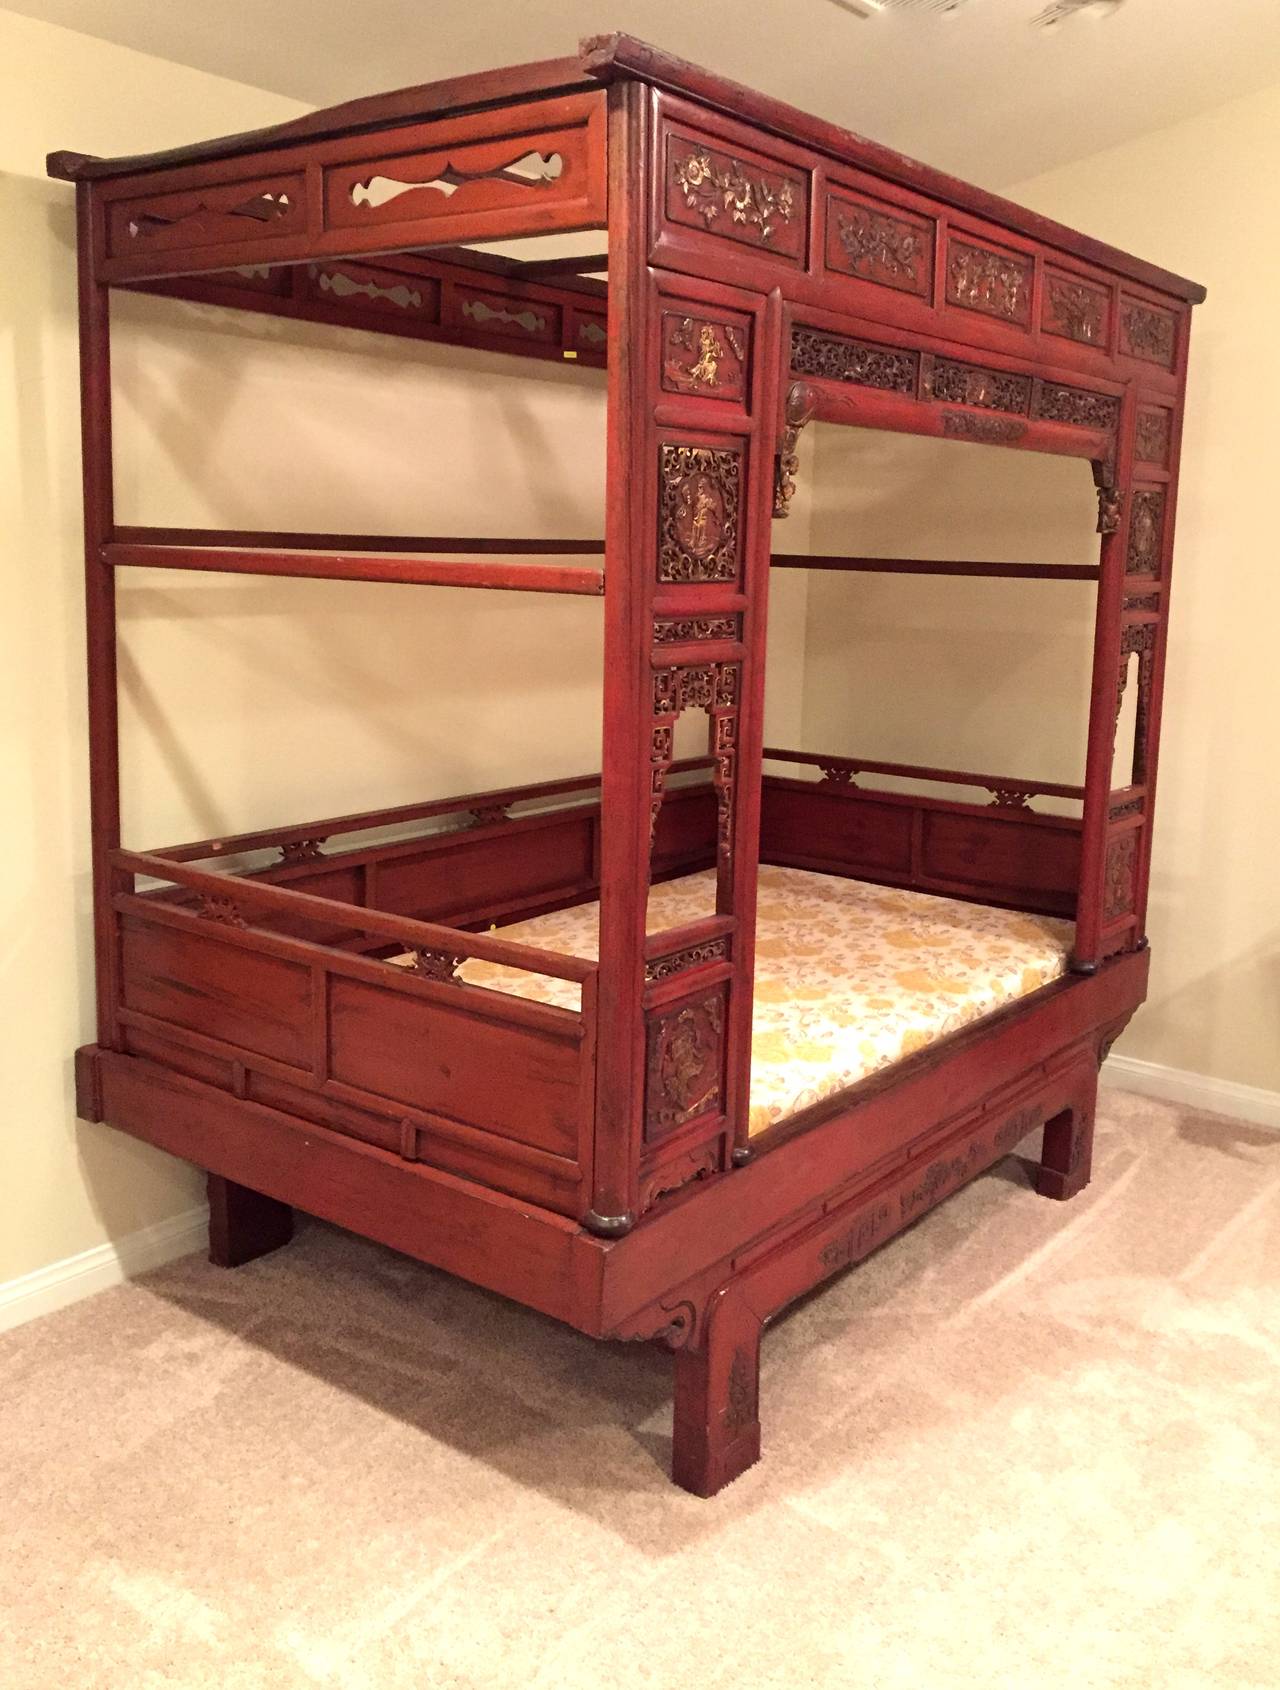 Words can not describe the beauty of this magnificent piece. 

In near perfect condition, this six-poster bed is true work of art. The whole structure uses no nails or glues. All posts and panels fit their custom slots as tenons and mortises.